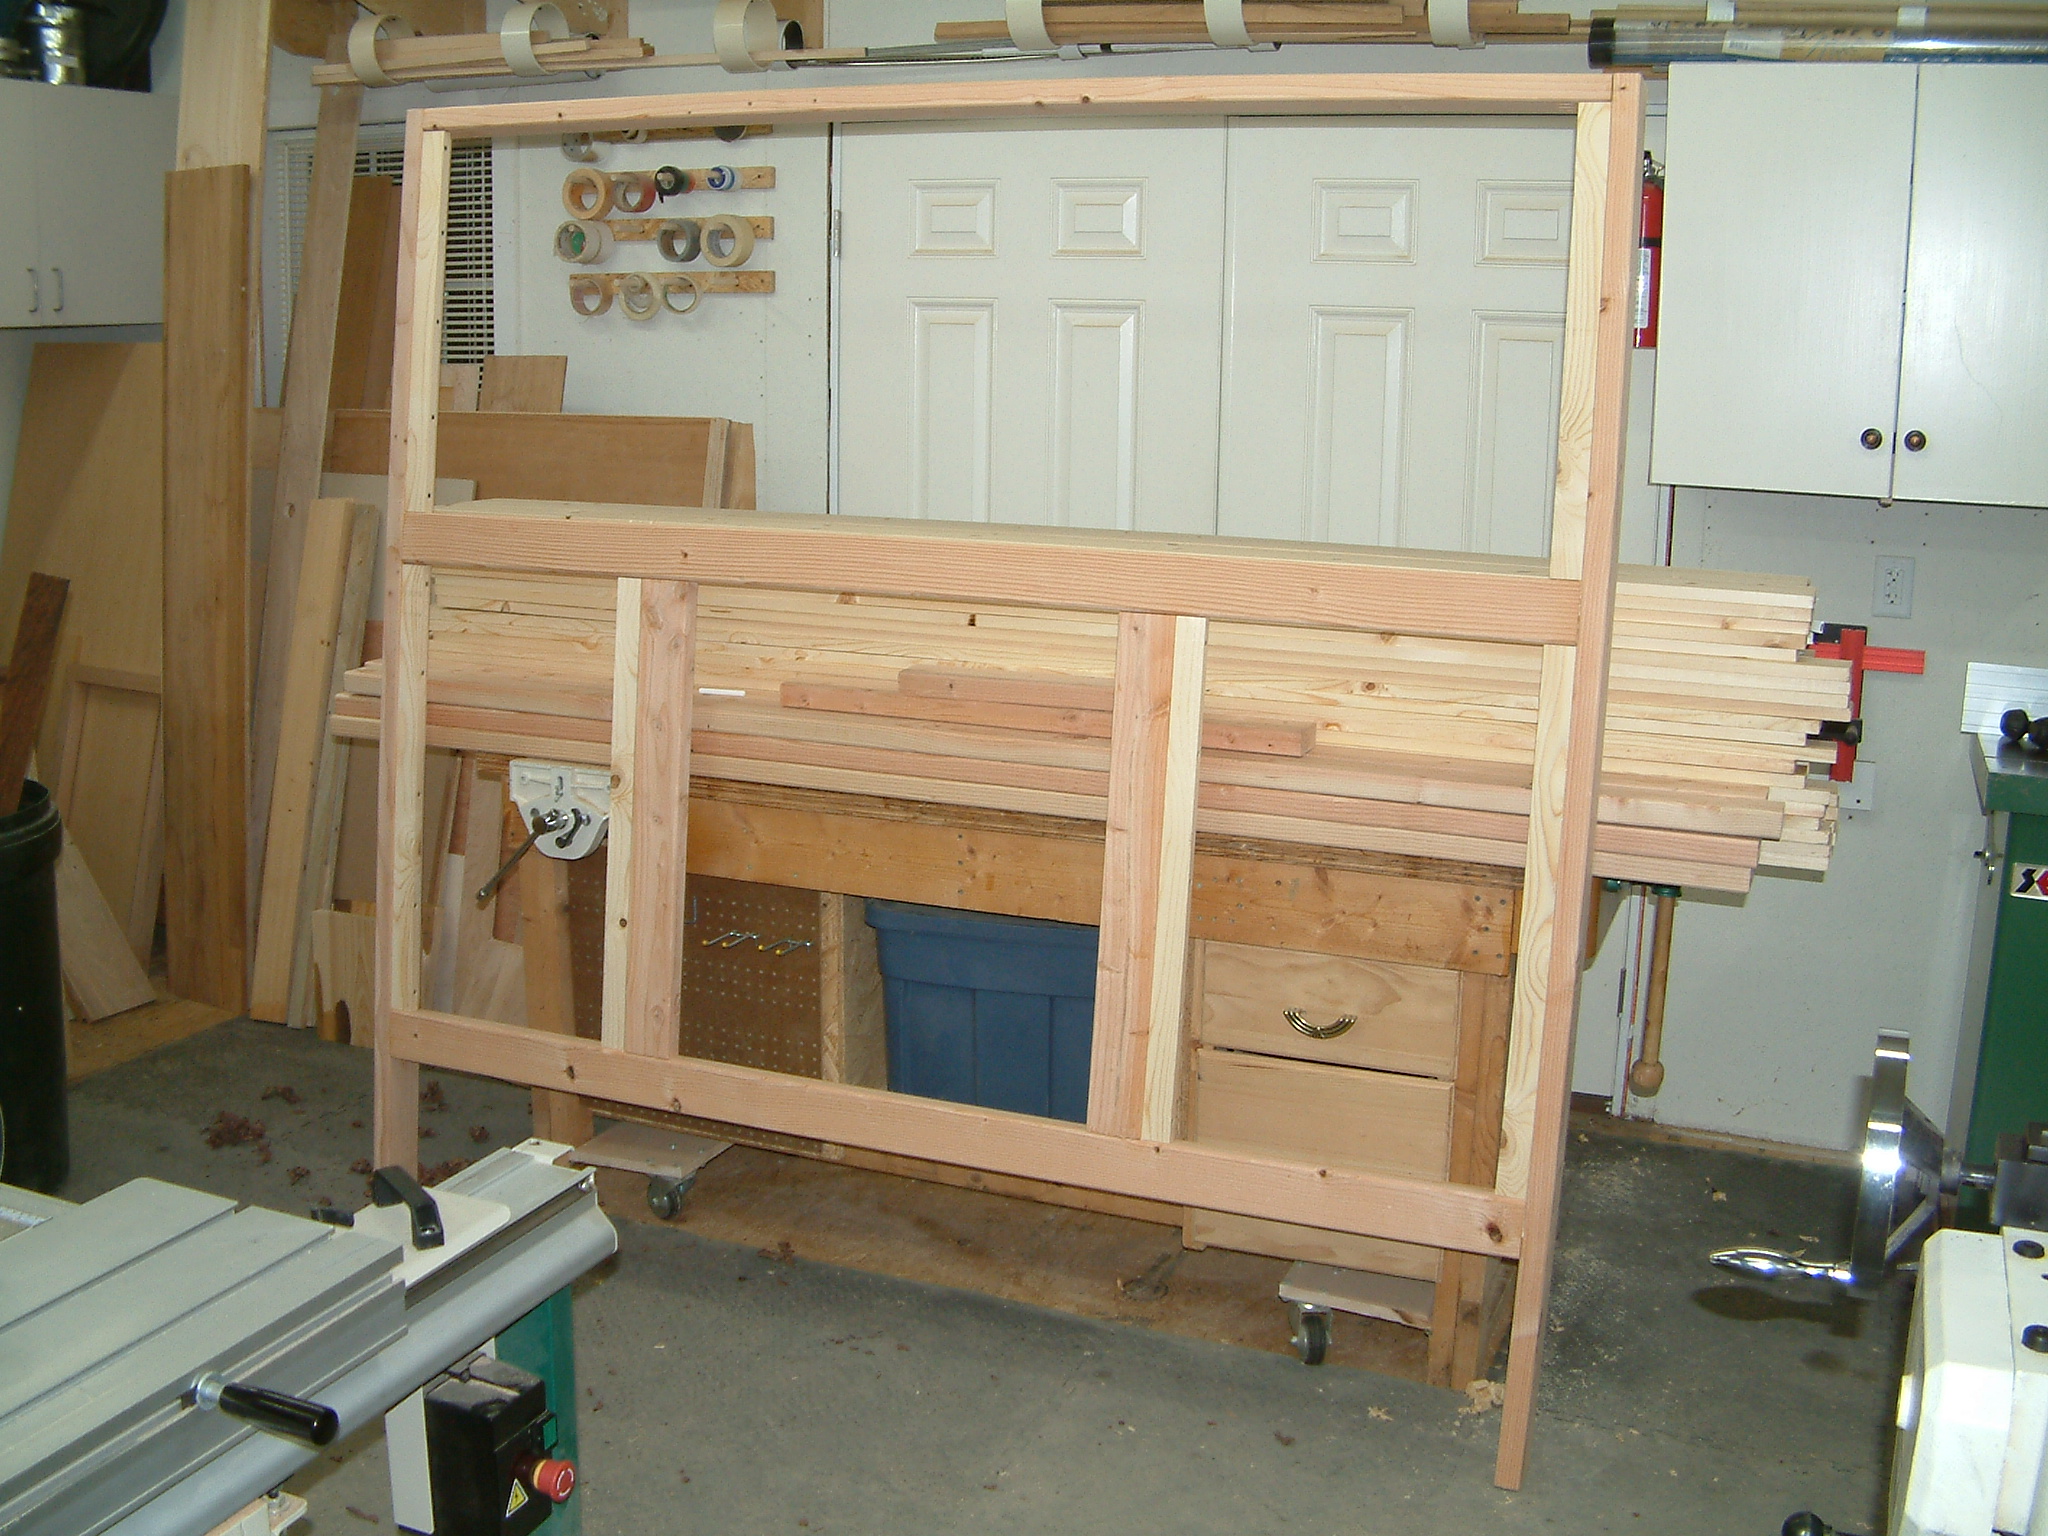 Bunks Beds for my Granddaughters